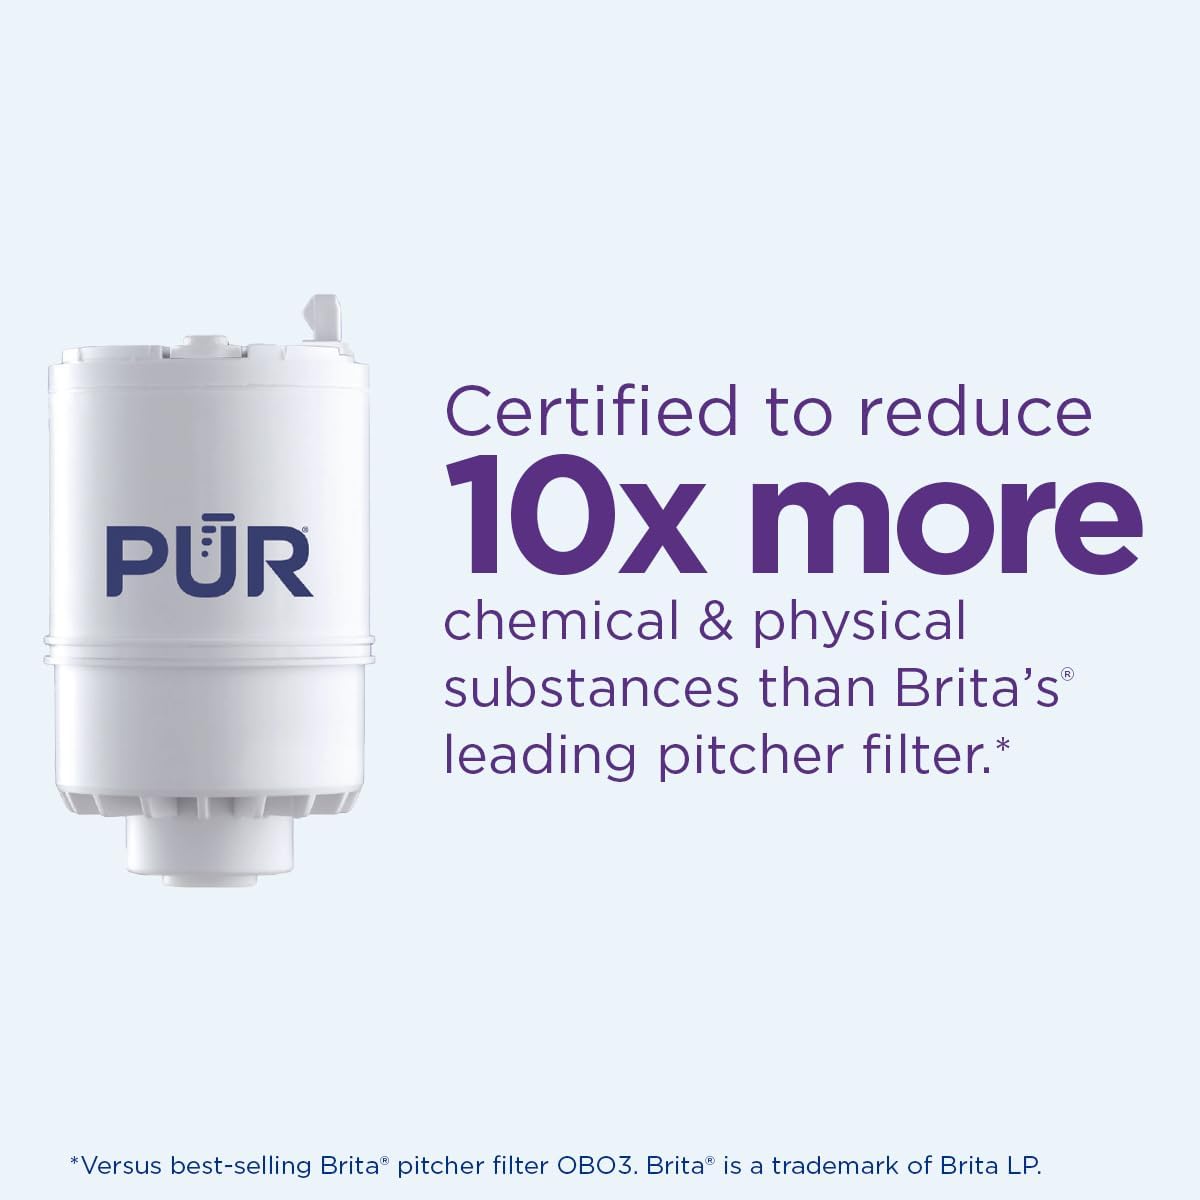 Introducing the PUR PLUS PFM150W Horizontal Faucet Mount Water Filtration System for Crisp, Refreshing, and Clean Drinking Water